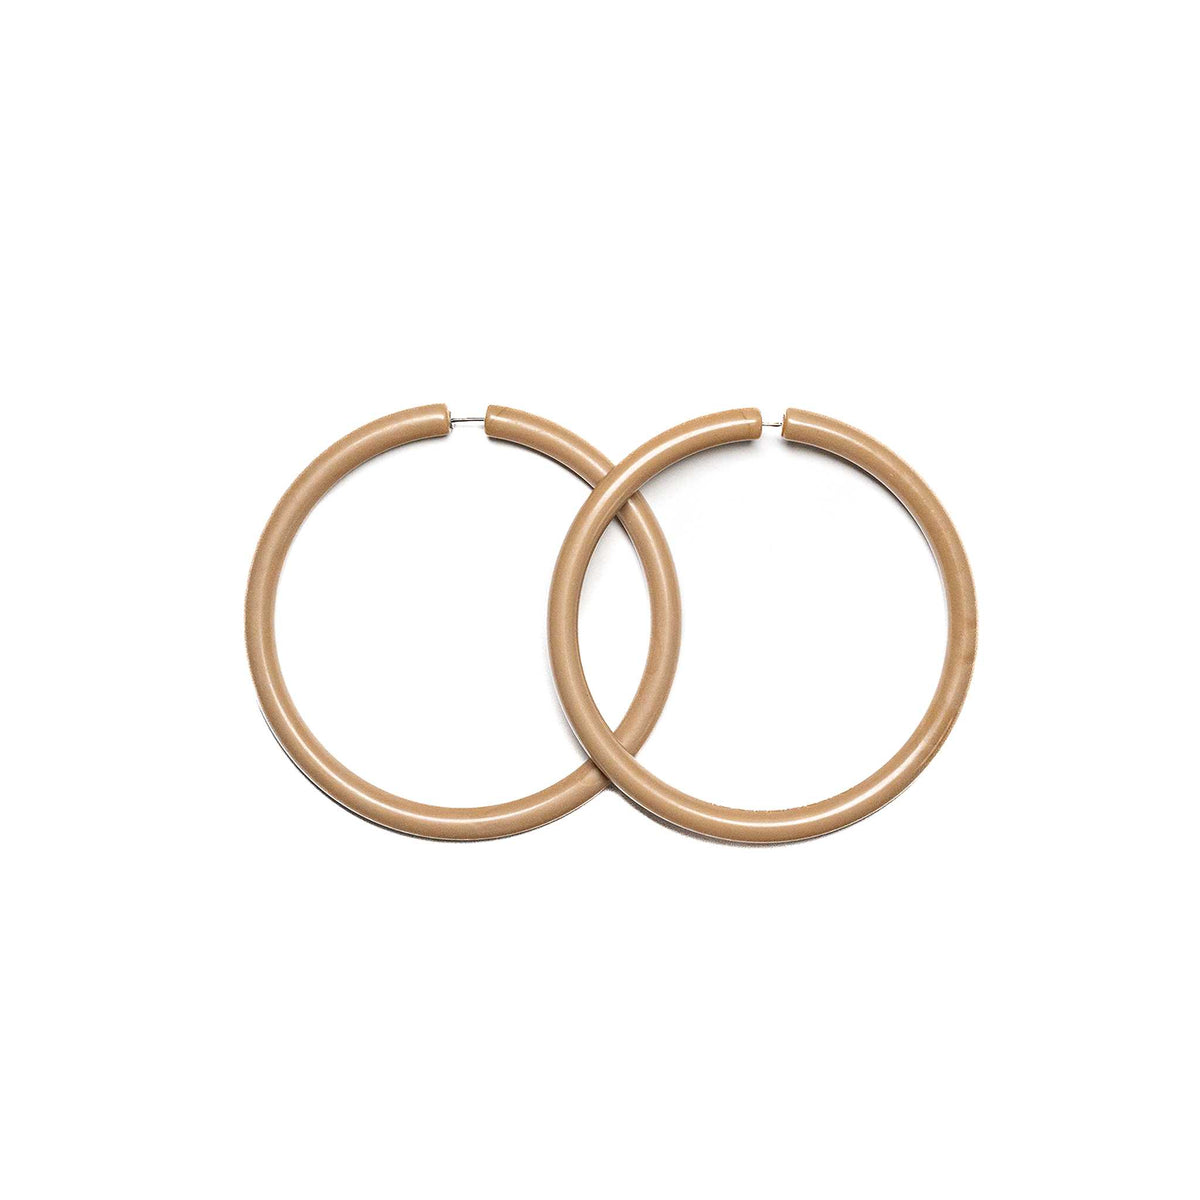 Hoop earrings the perfect statement of style from Carmen Sol